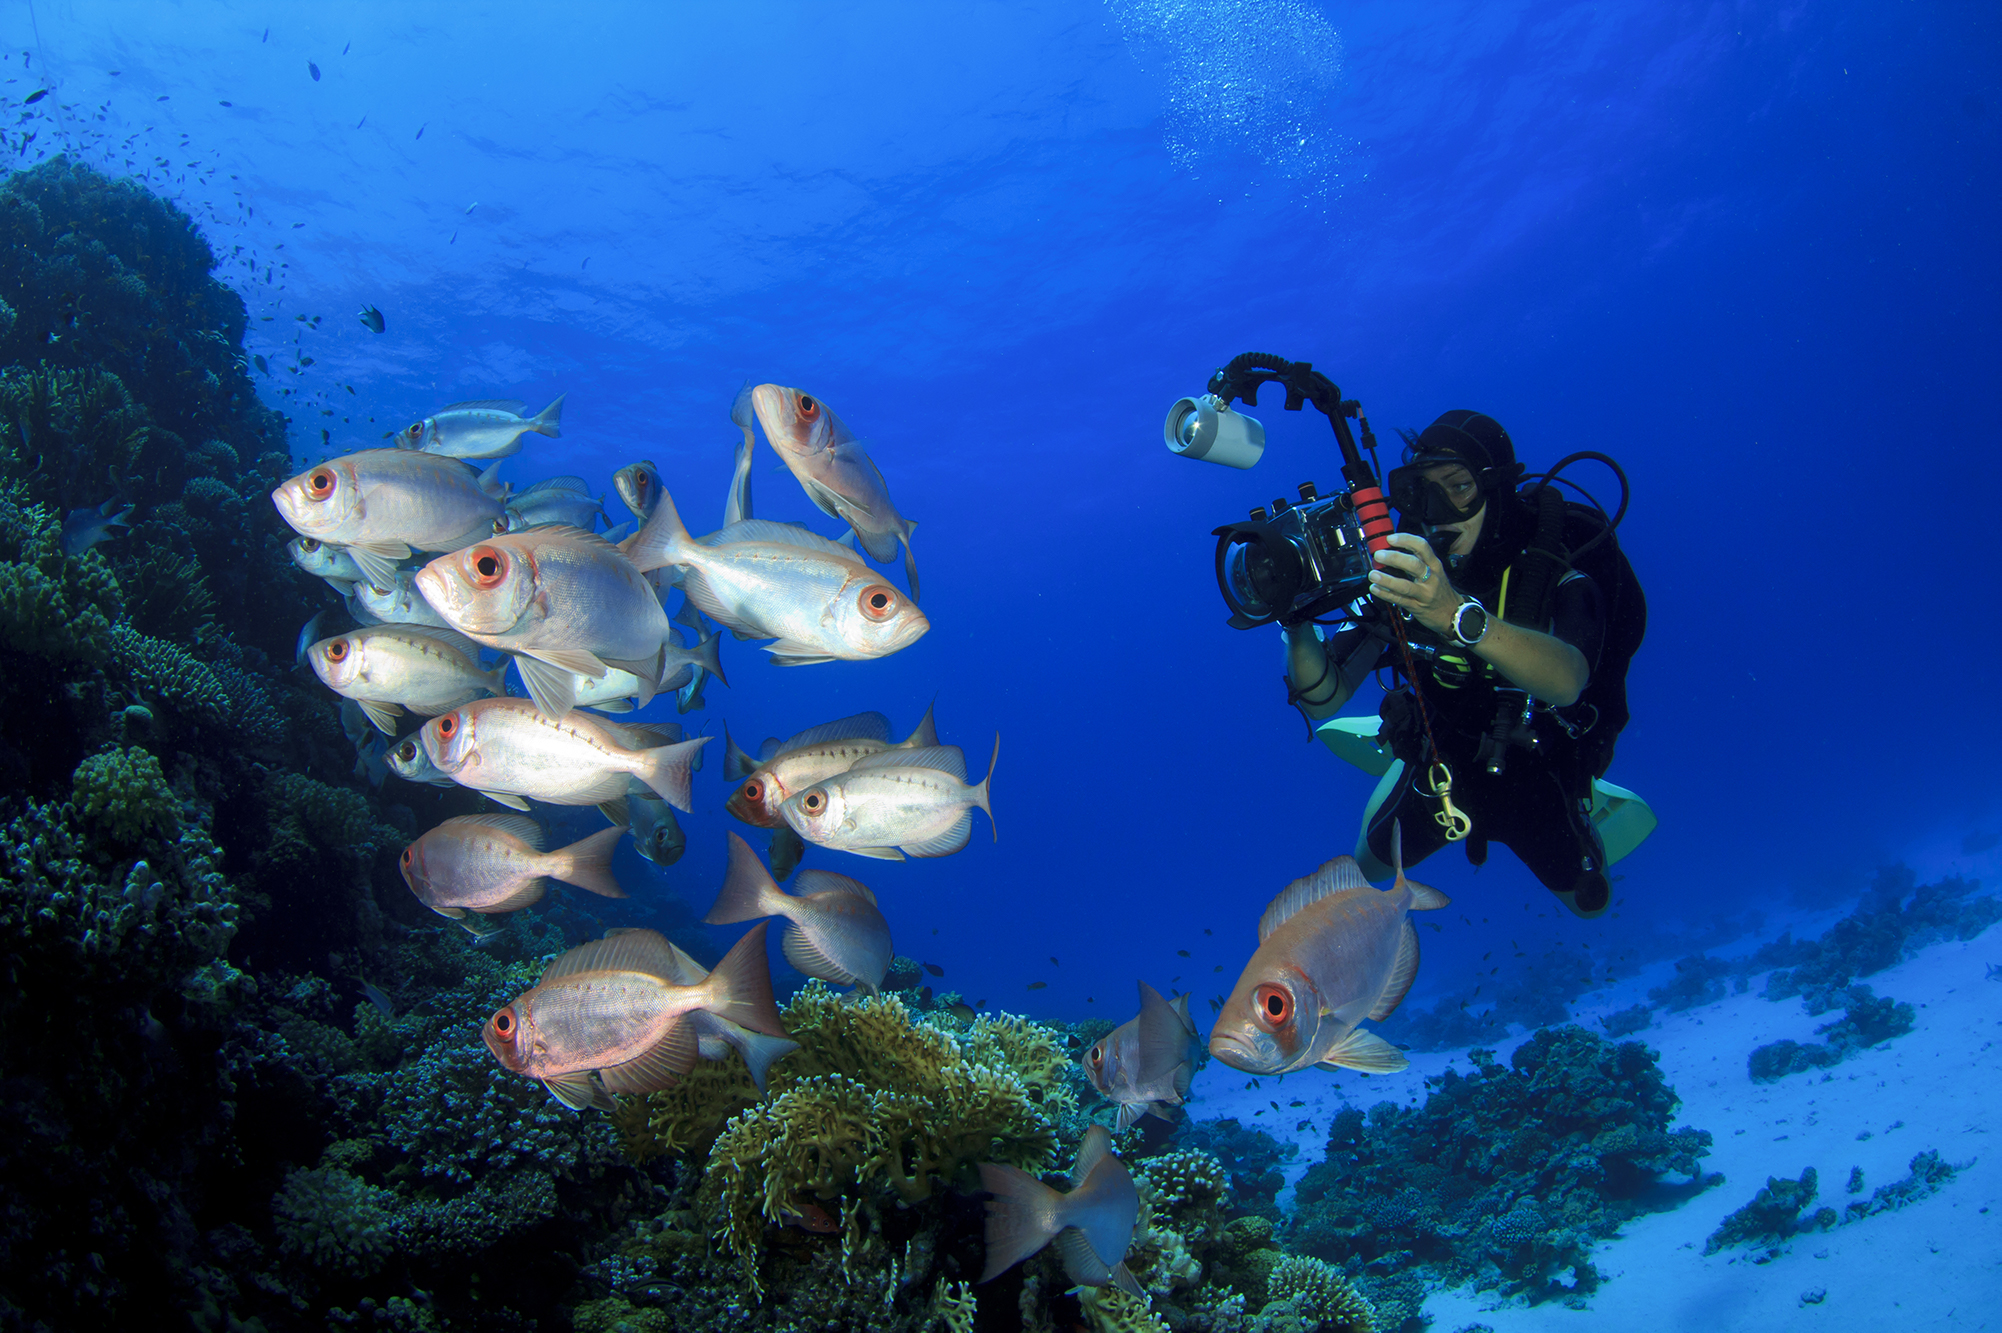 A diver practising underwater photography, a PADI Specialty available after getting the PADI Open Water Diver certification